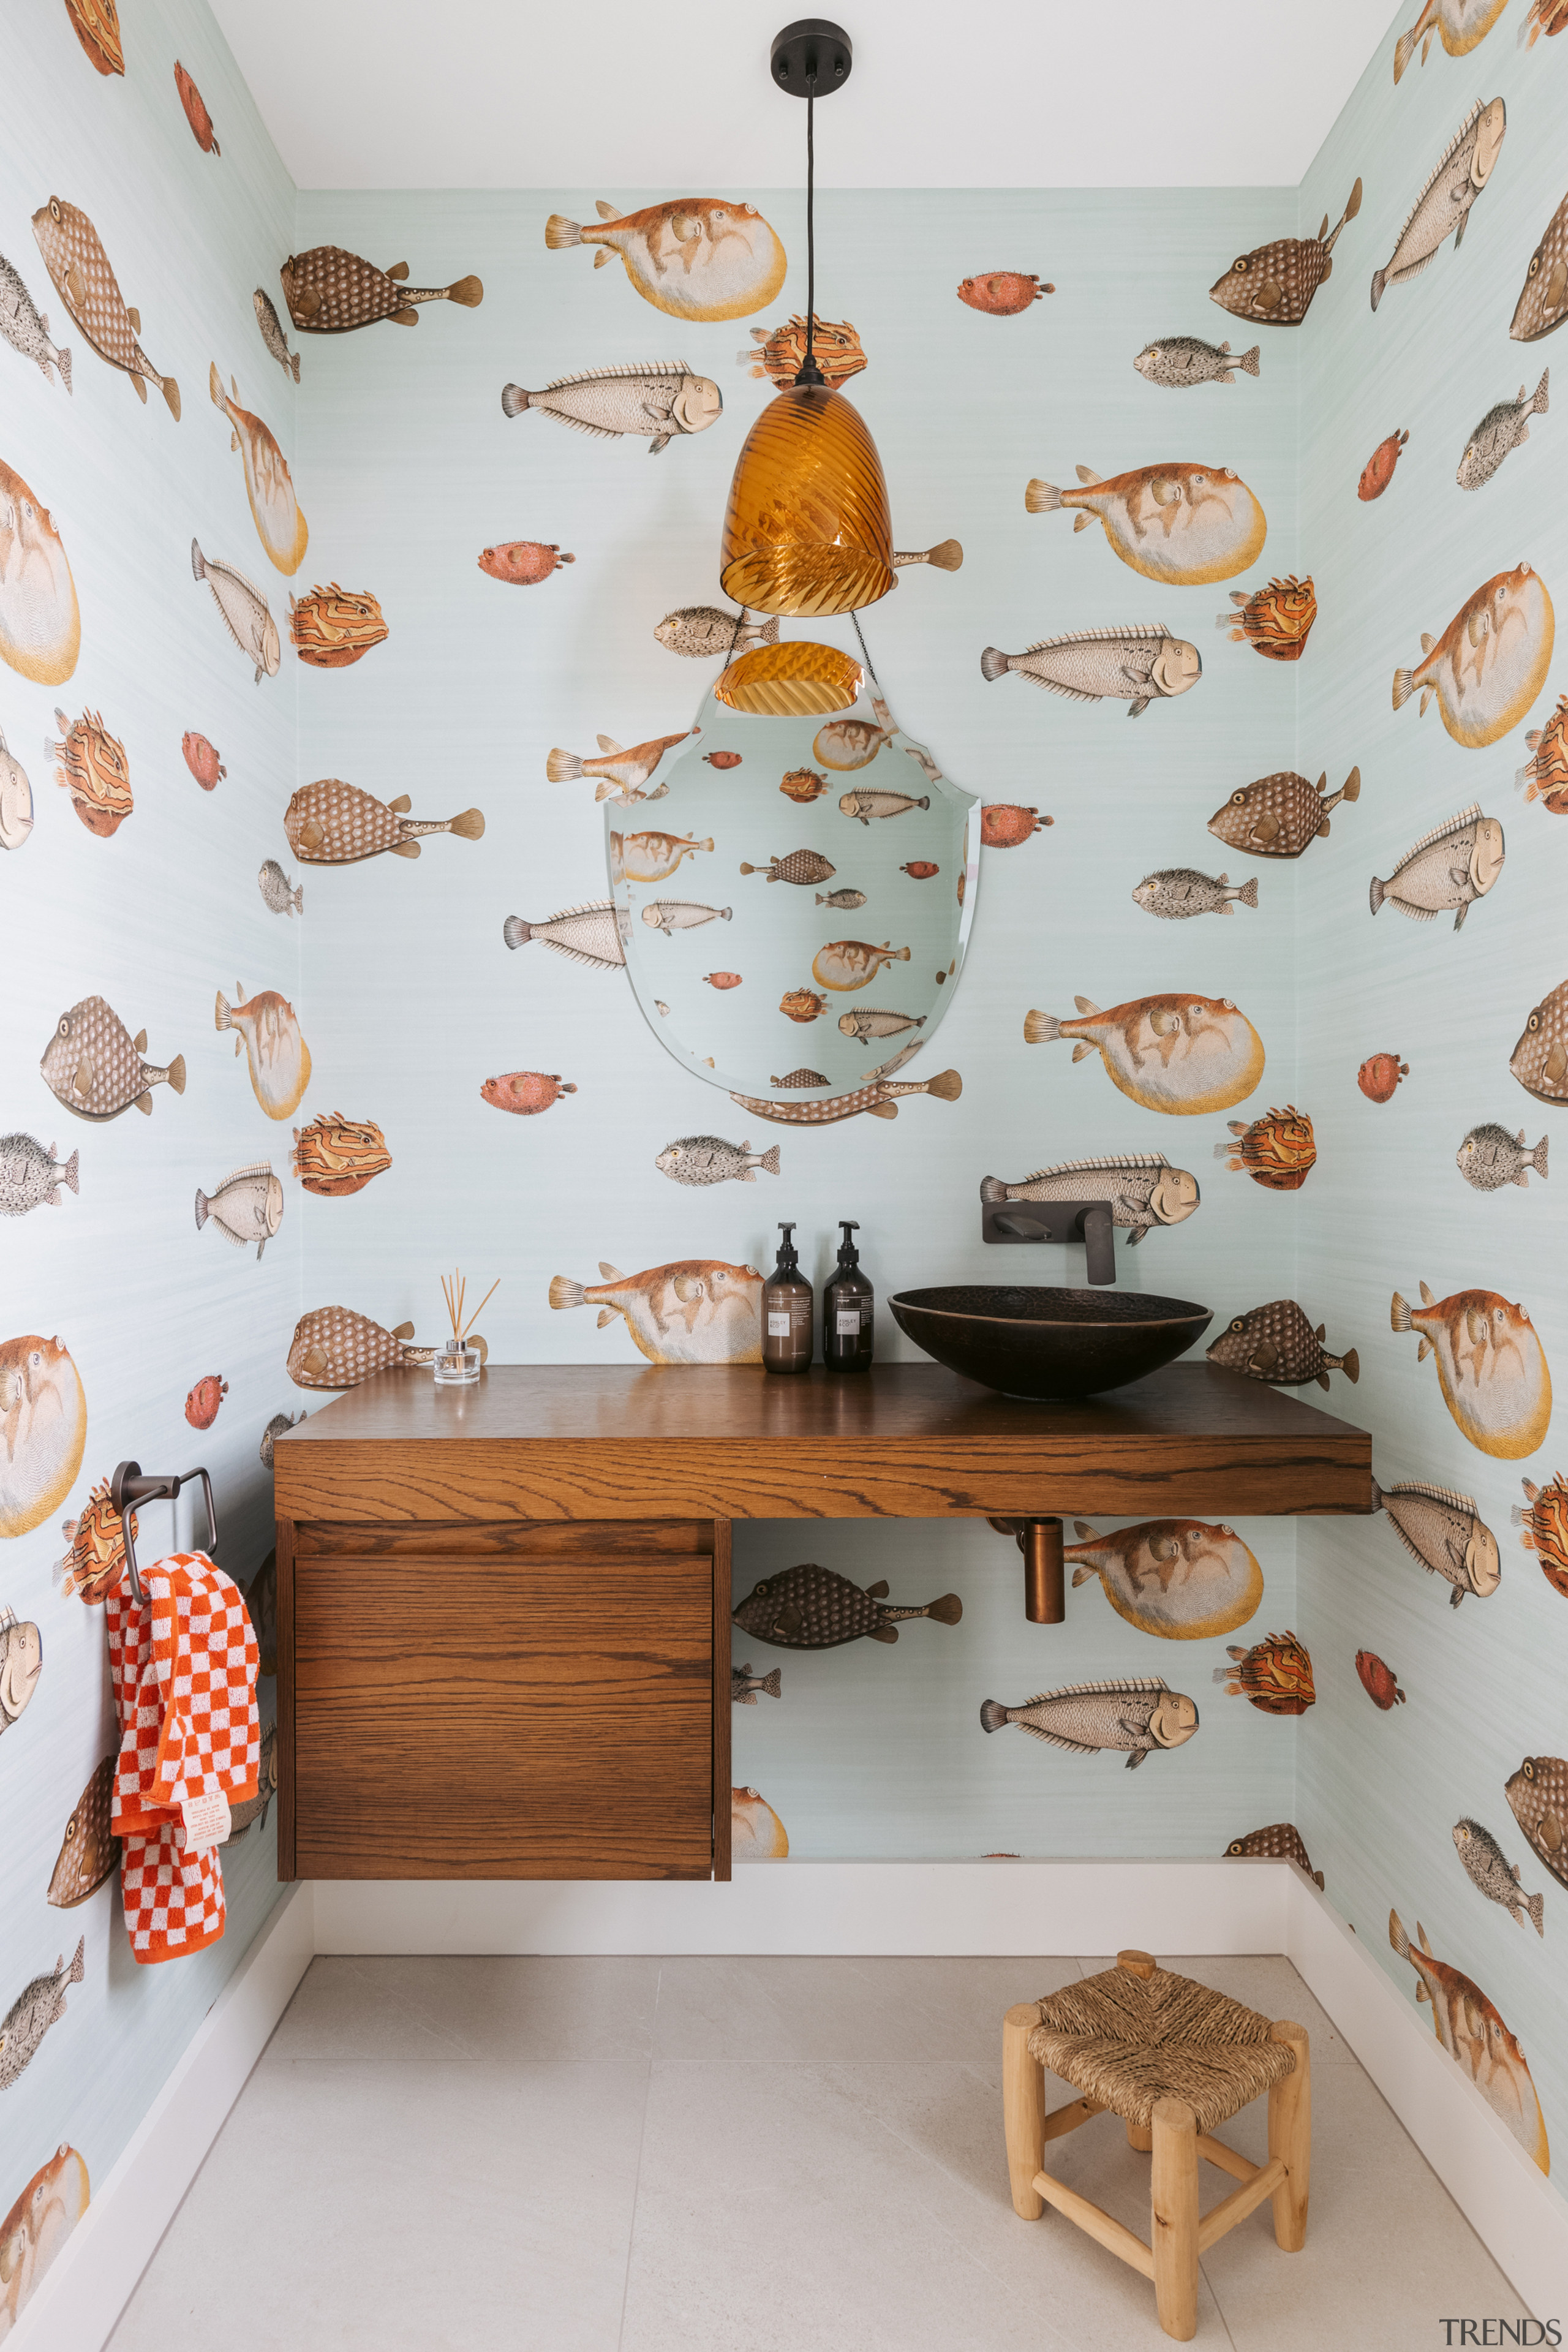 The powder room upstairs features fish wallpaper and 